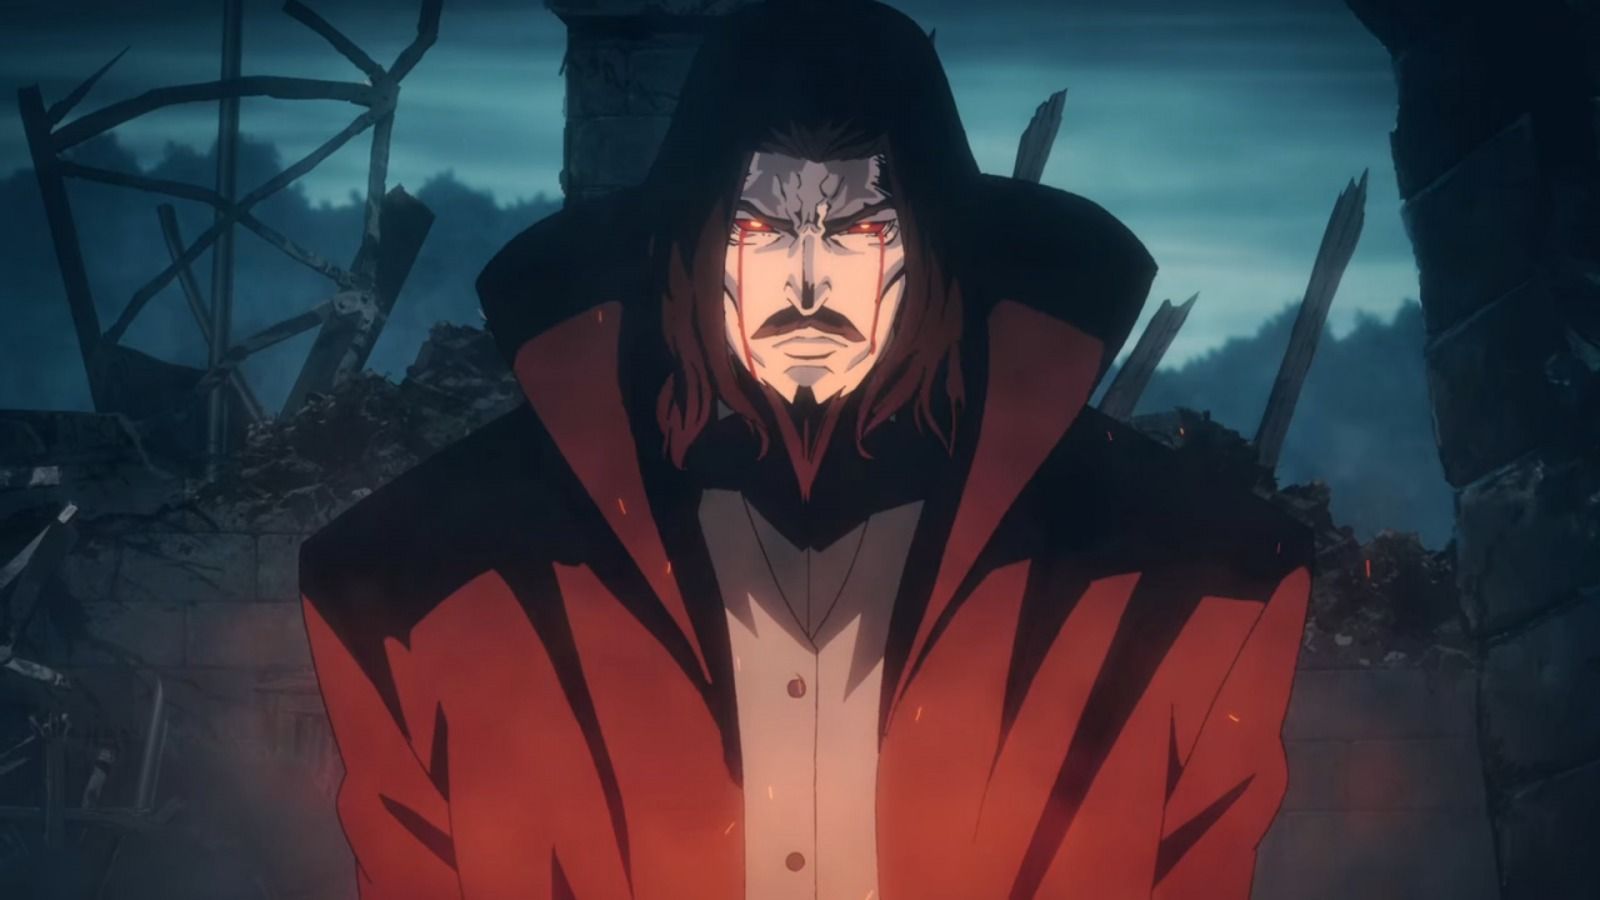 The horror anime Blood of Zeus fans need to watch next